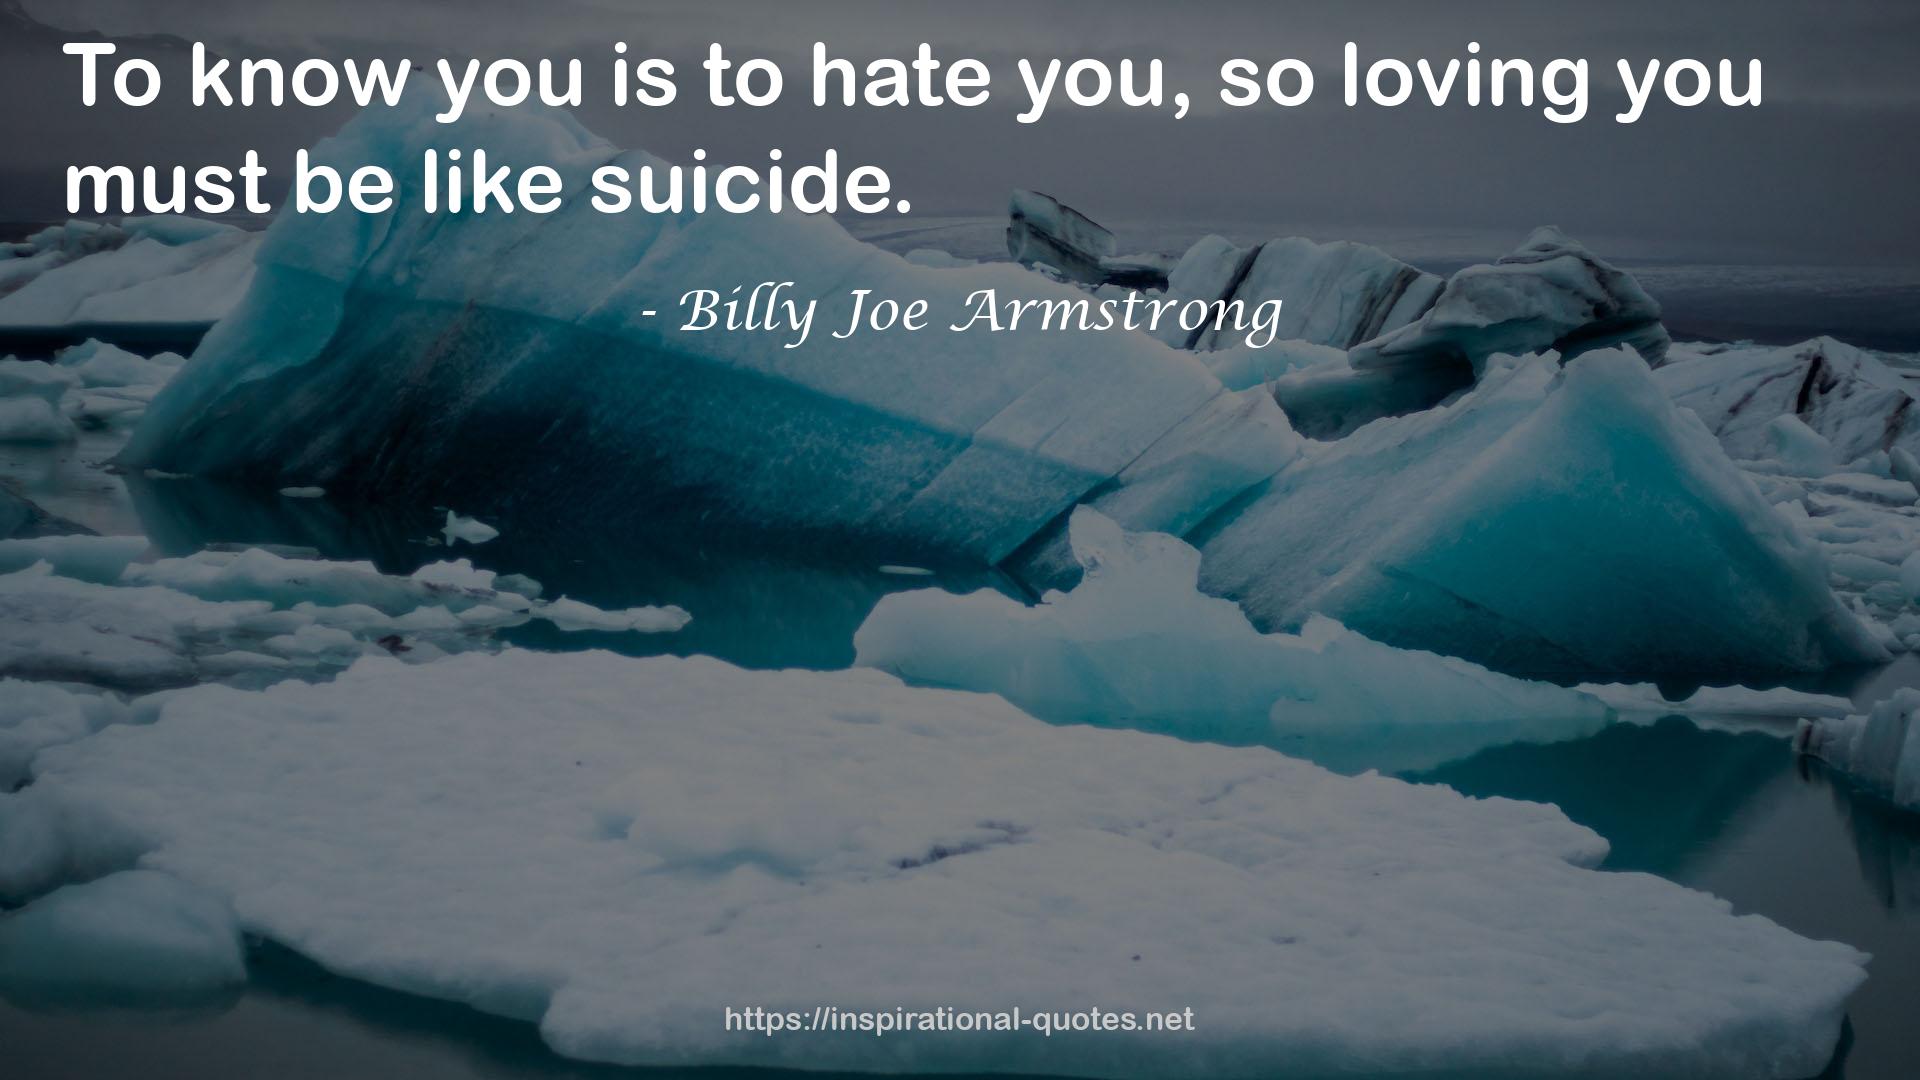 Billy Joe Armstrong QUOTES